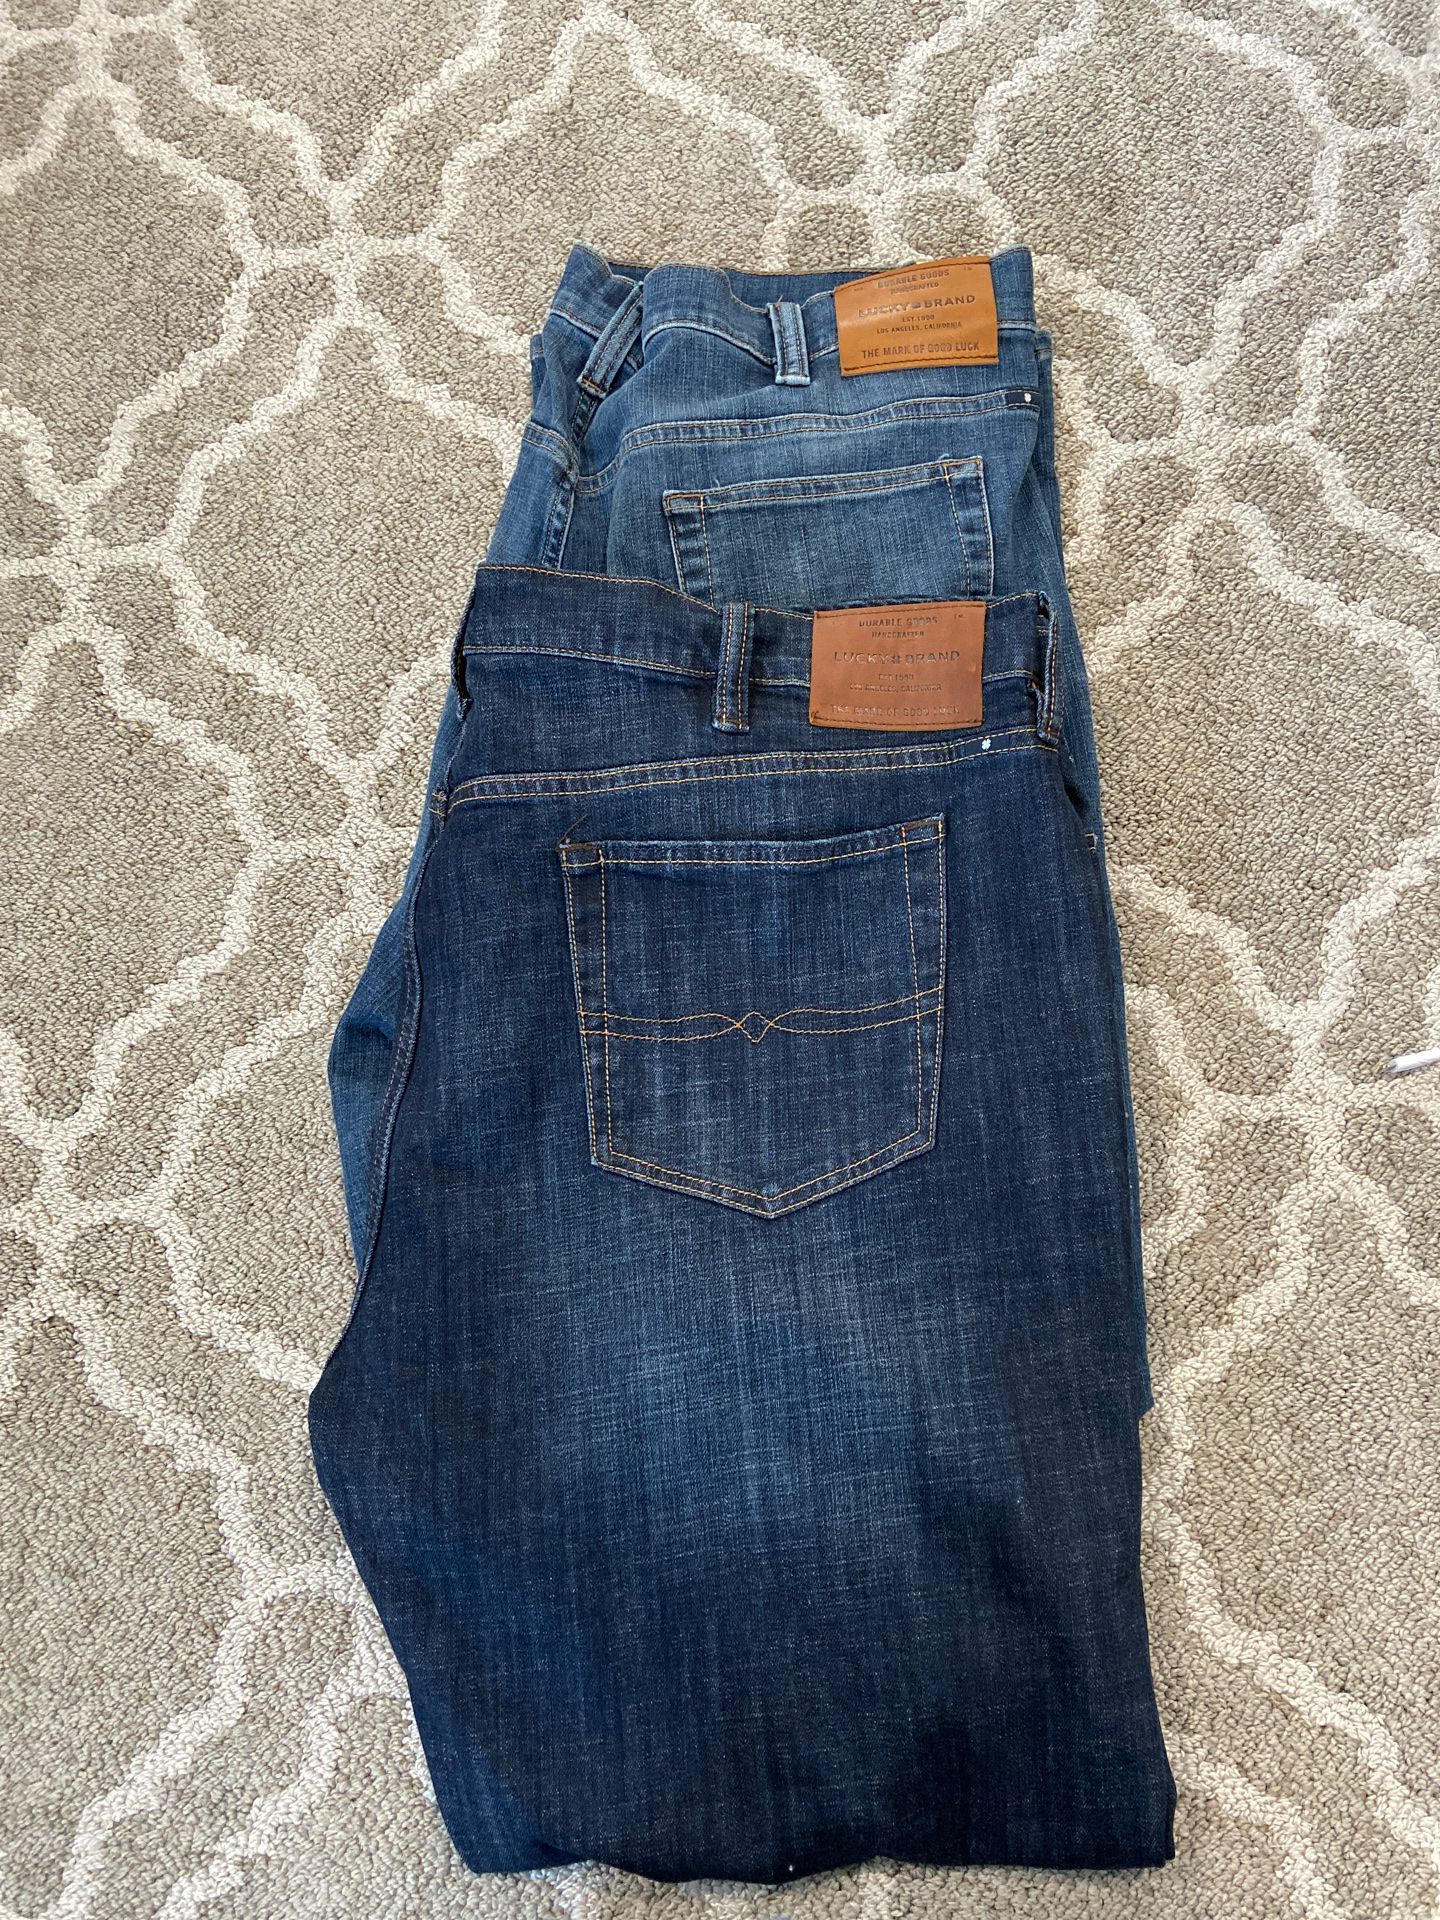 Men’s lucky brand jeans. Worn once